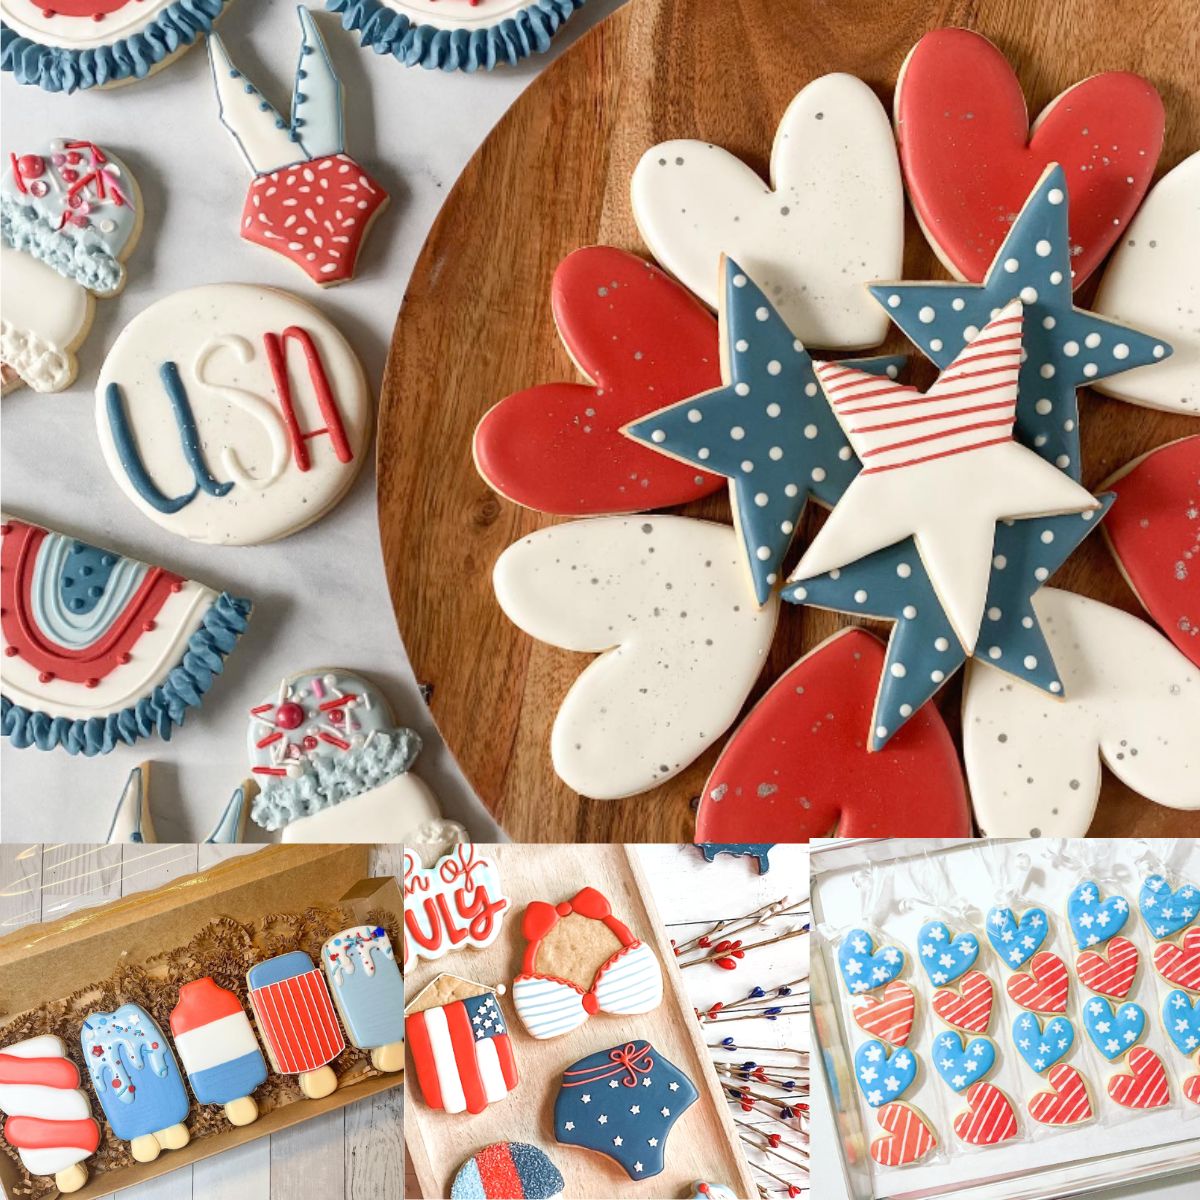 A photo collage shows samples of several red, white, and blue sugar cookie designs.